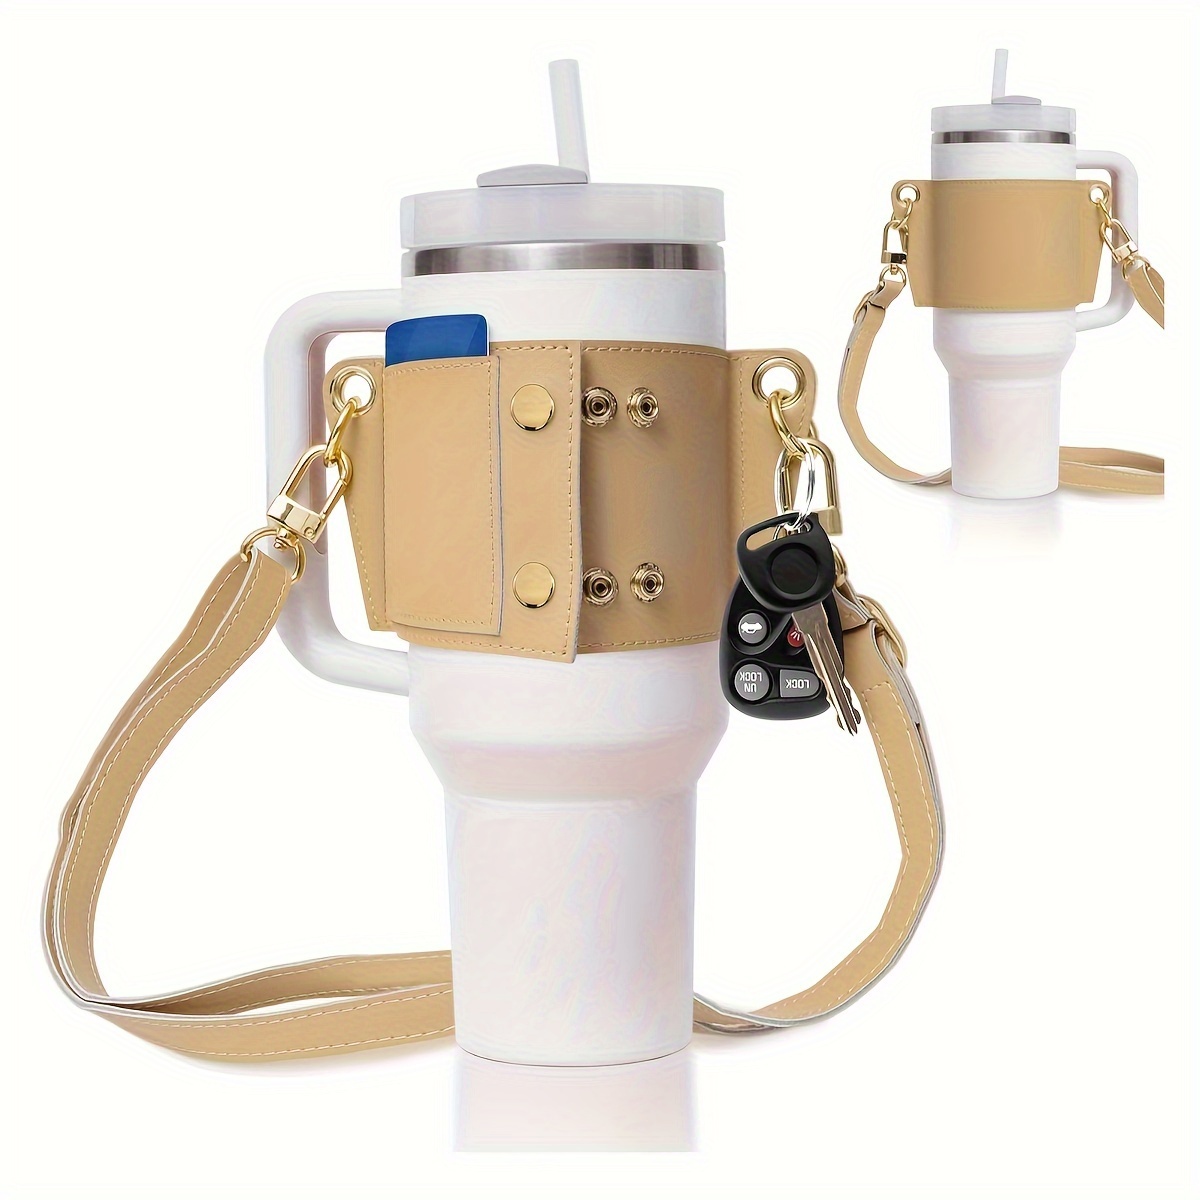 wirlsweal Portable Sling Cup Sleeve Cup Sleeve with Adjustable